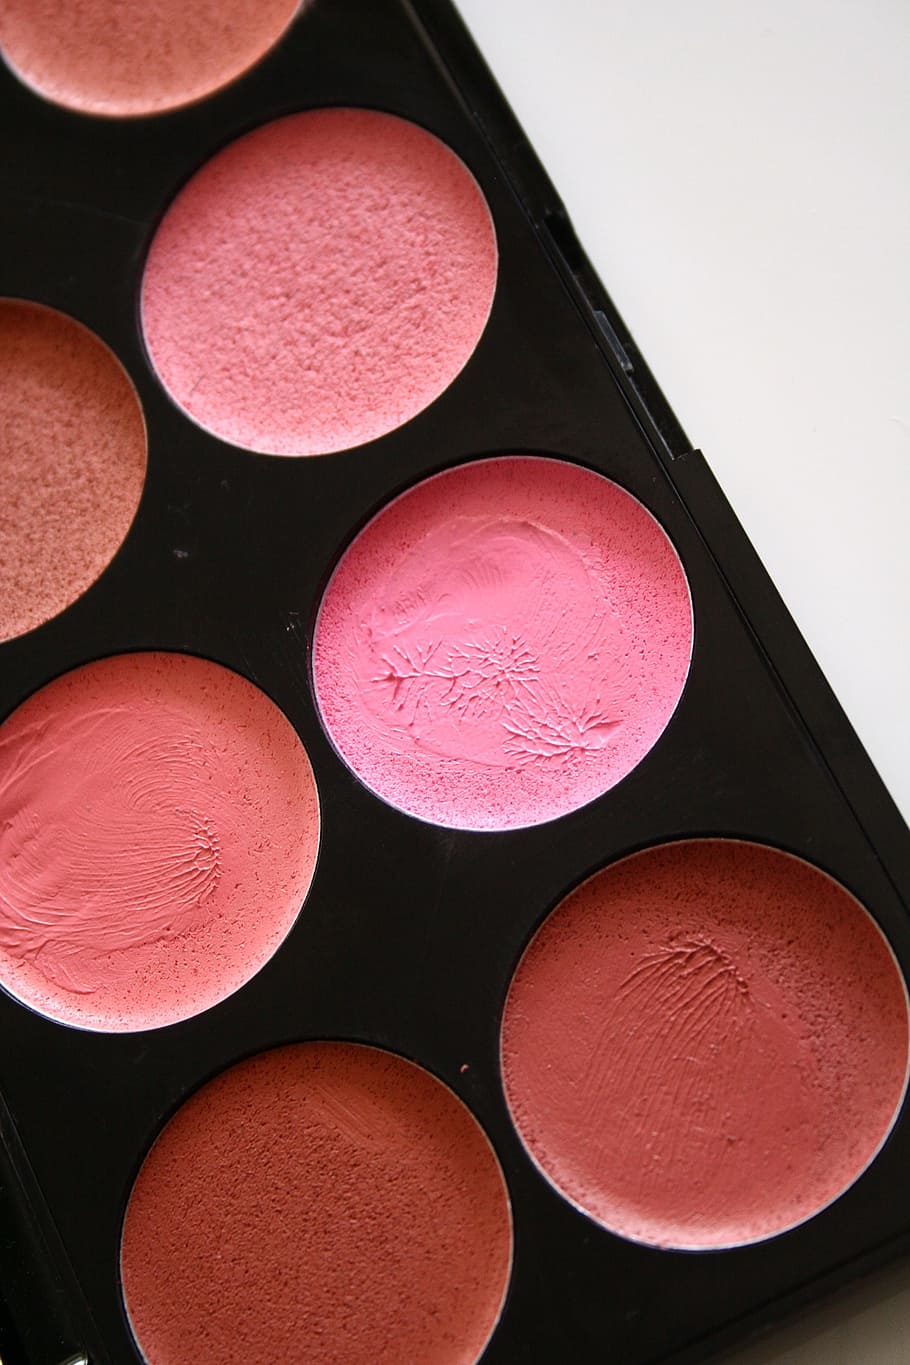 black makeup palette, blush, cream blush, cosmetics, blusher, makeup, cosmetic products, make-up, red, beauty product